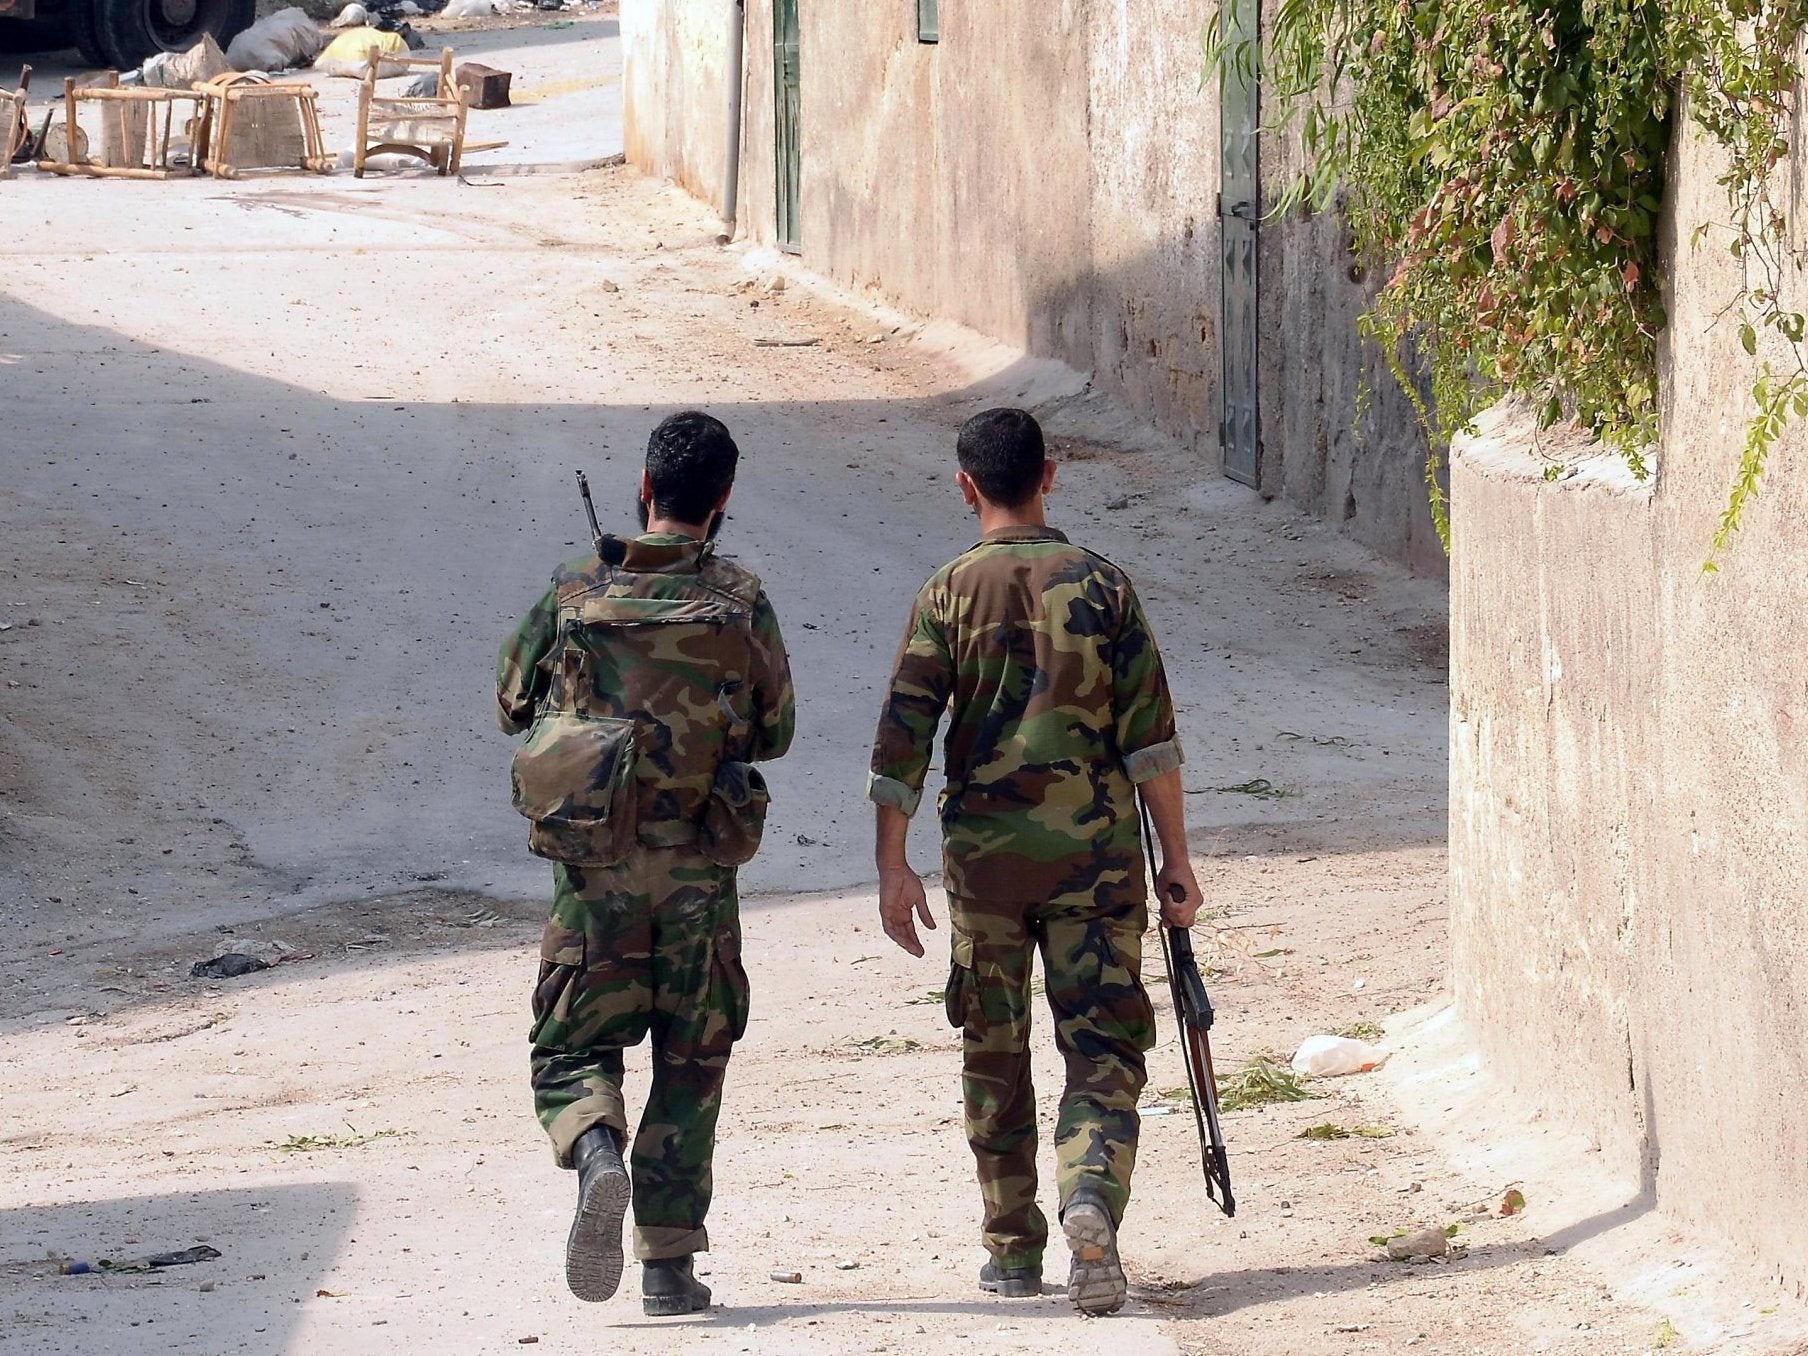 Two soldiers from a unit of the Syrian armed forces carry out a military operation in 2012 (file photo)